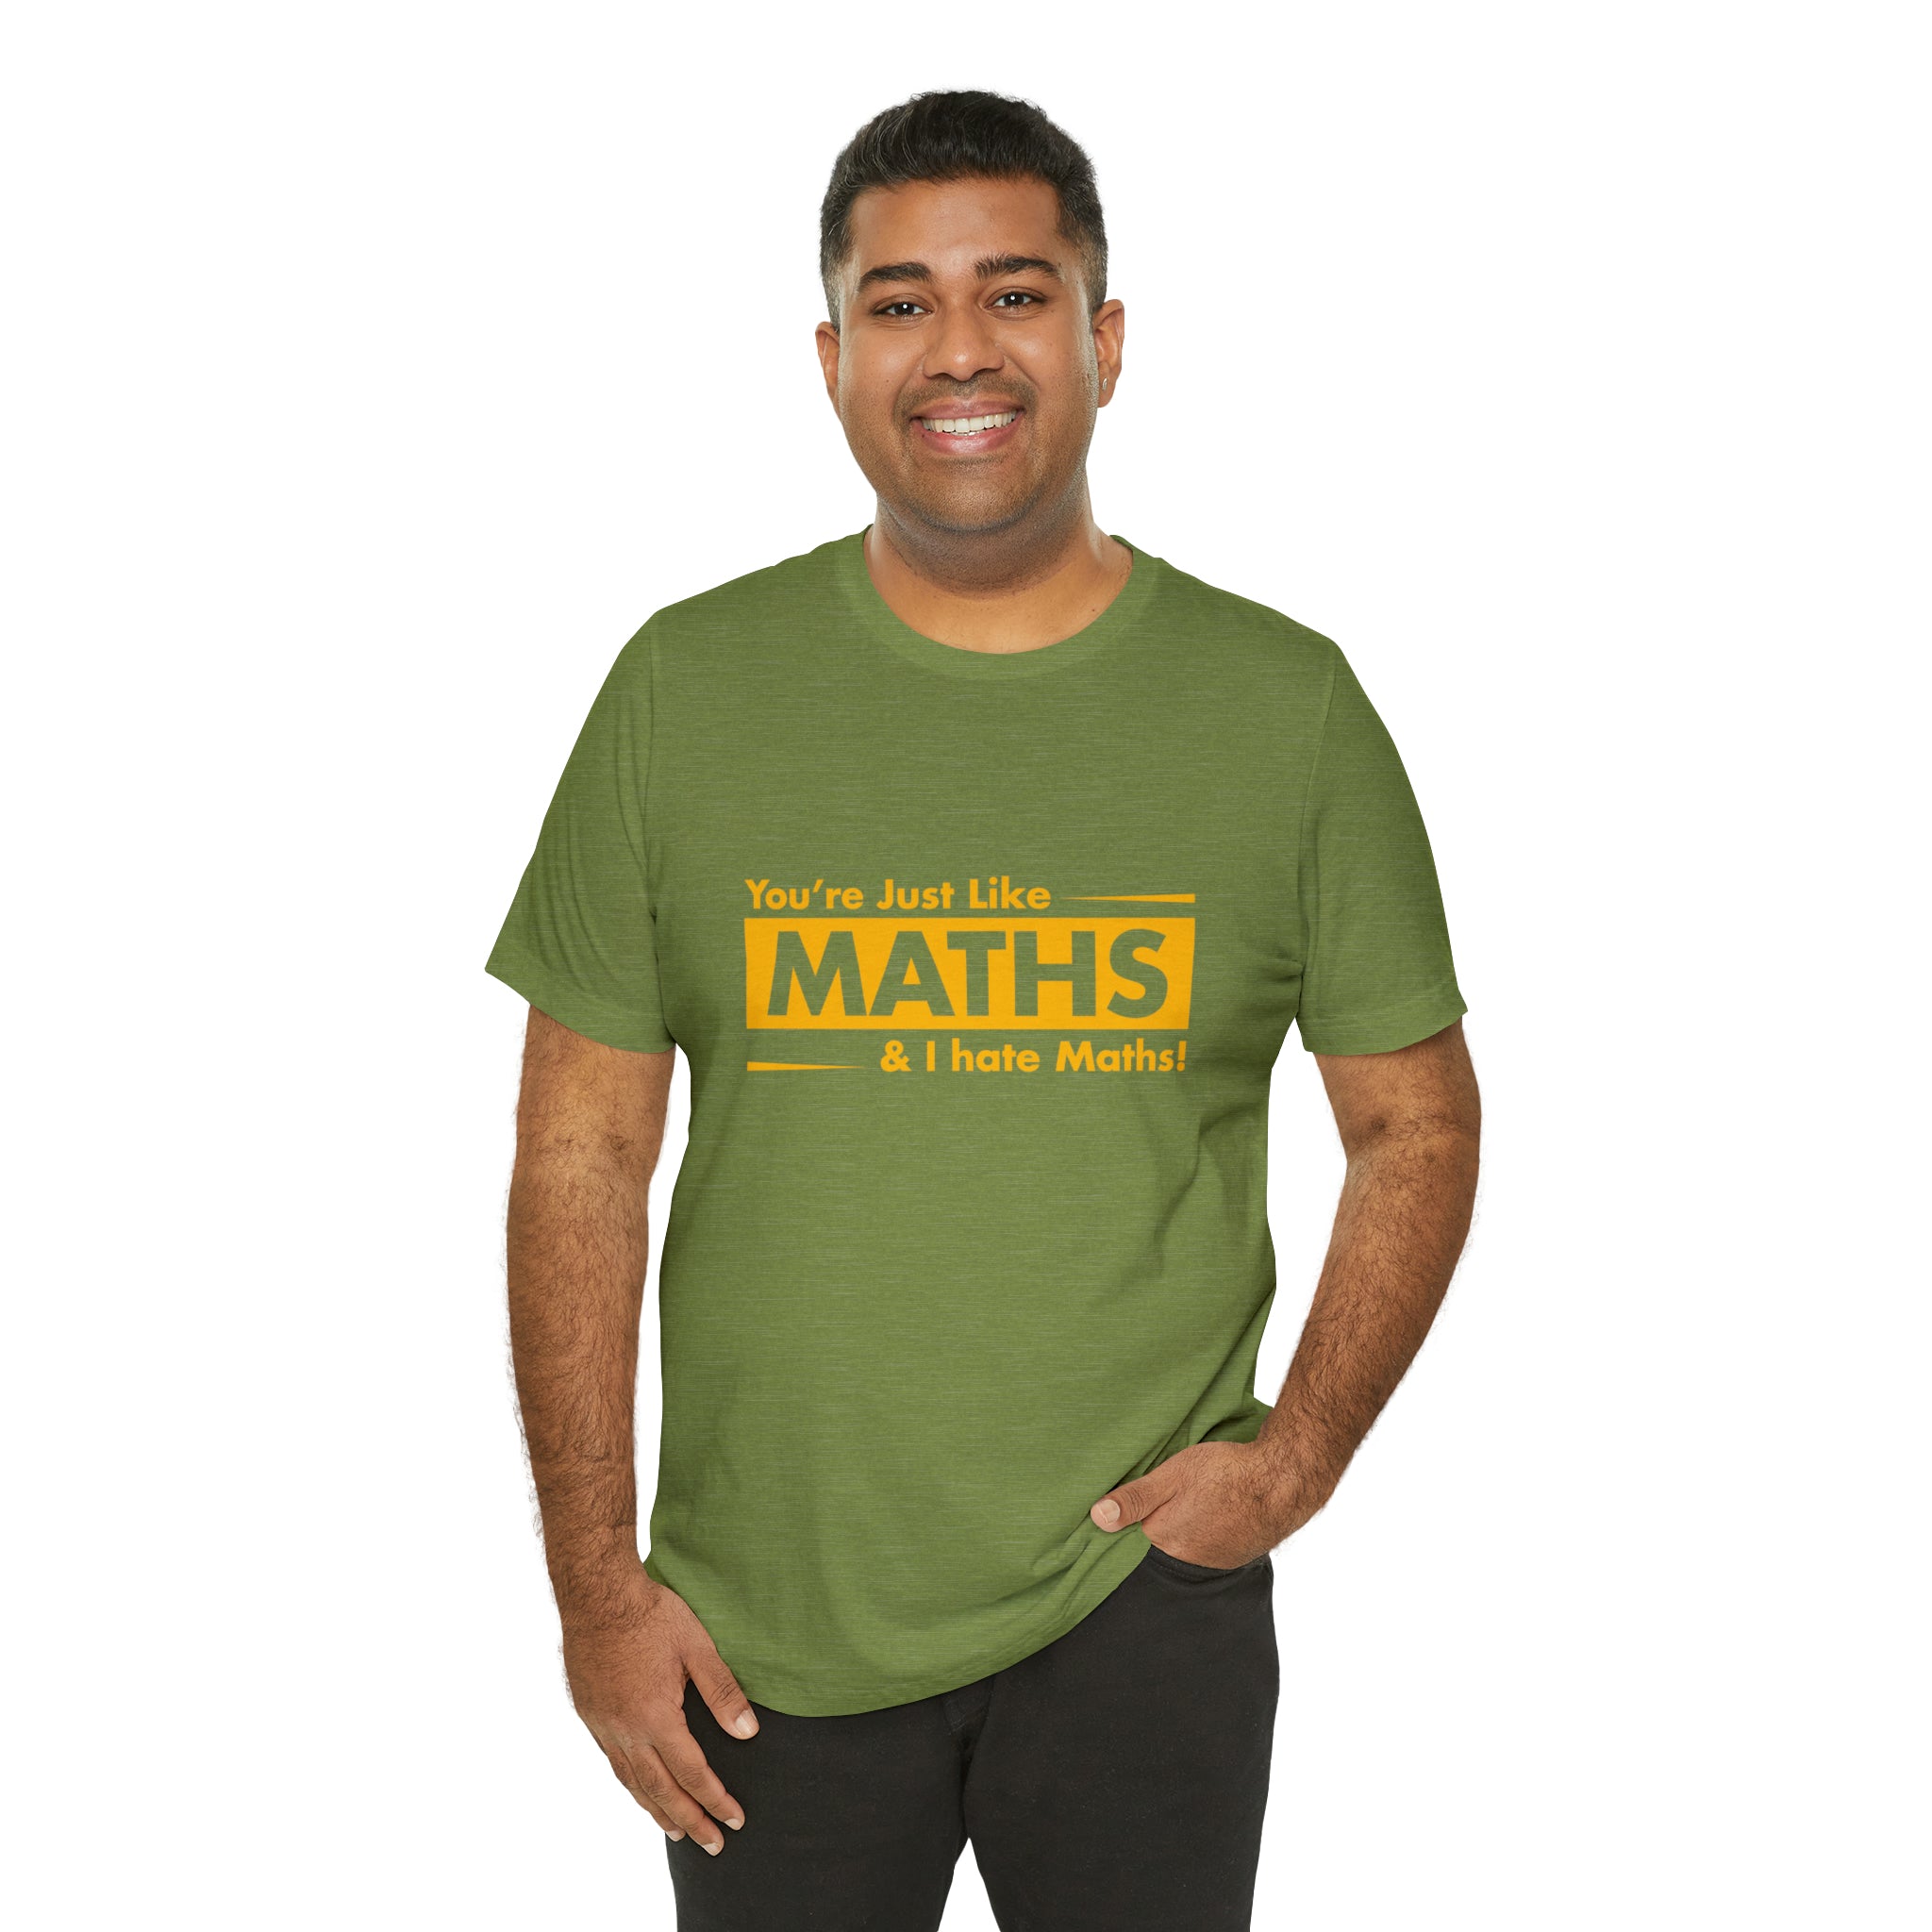 A man showcasing his fashion sense with a "You are just like maths and I hate maths" T-shirt.